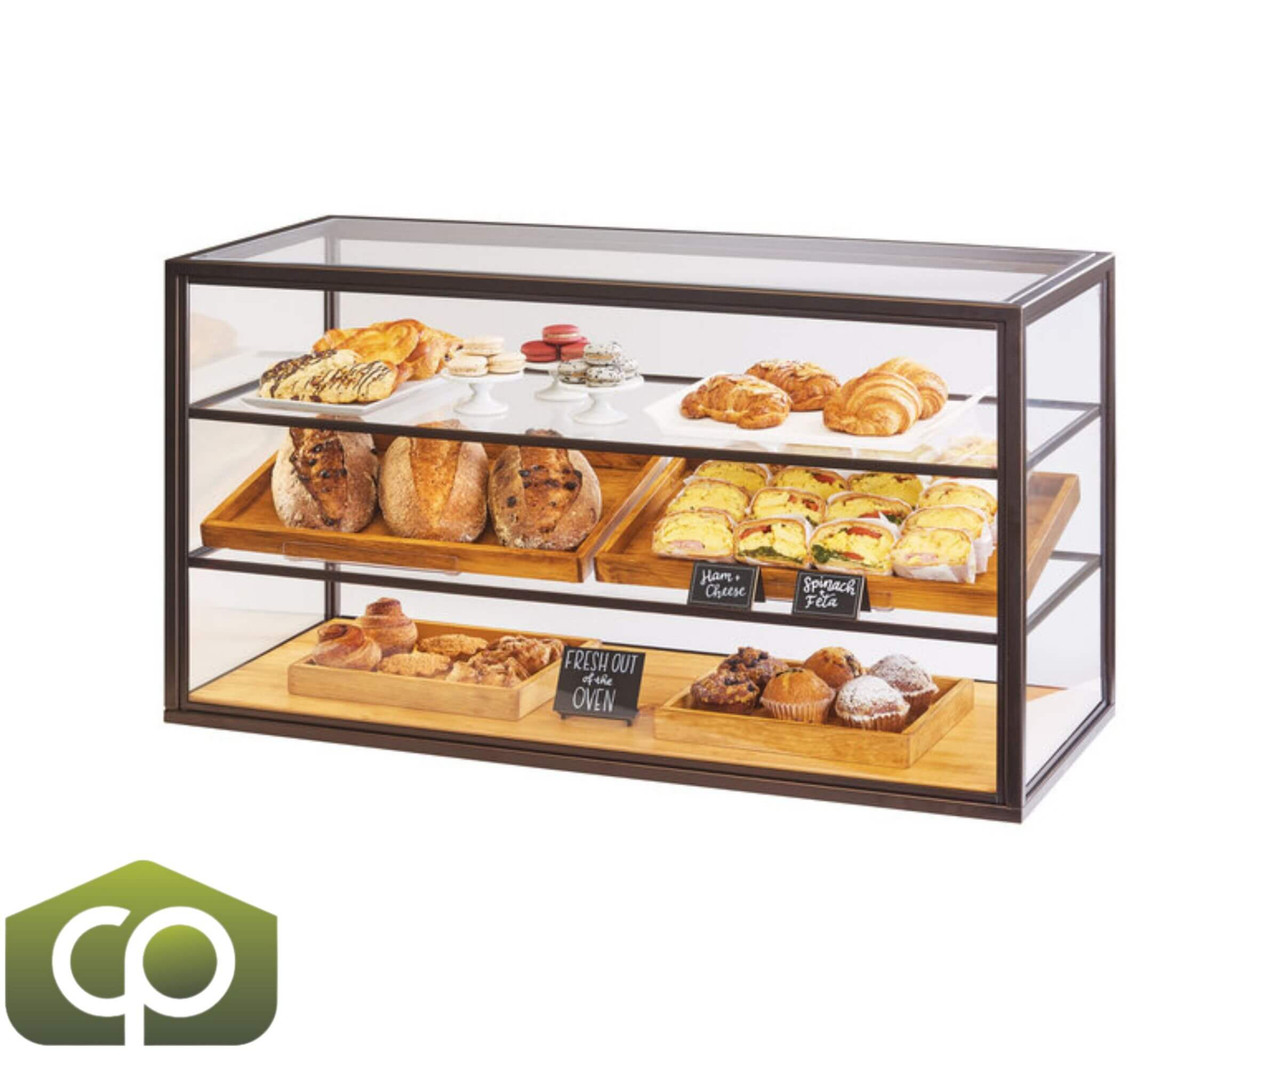 Cal-Mil Sierra 42" x 17" x 23" Display Case - Stylish and Functional-Chicken Pieces